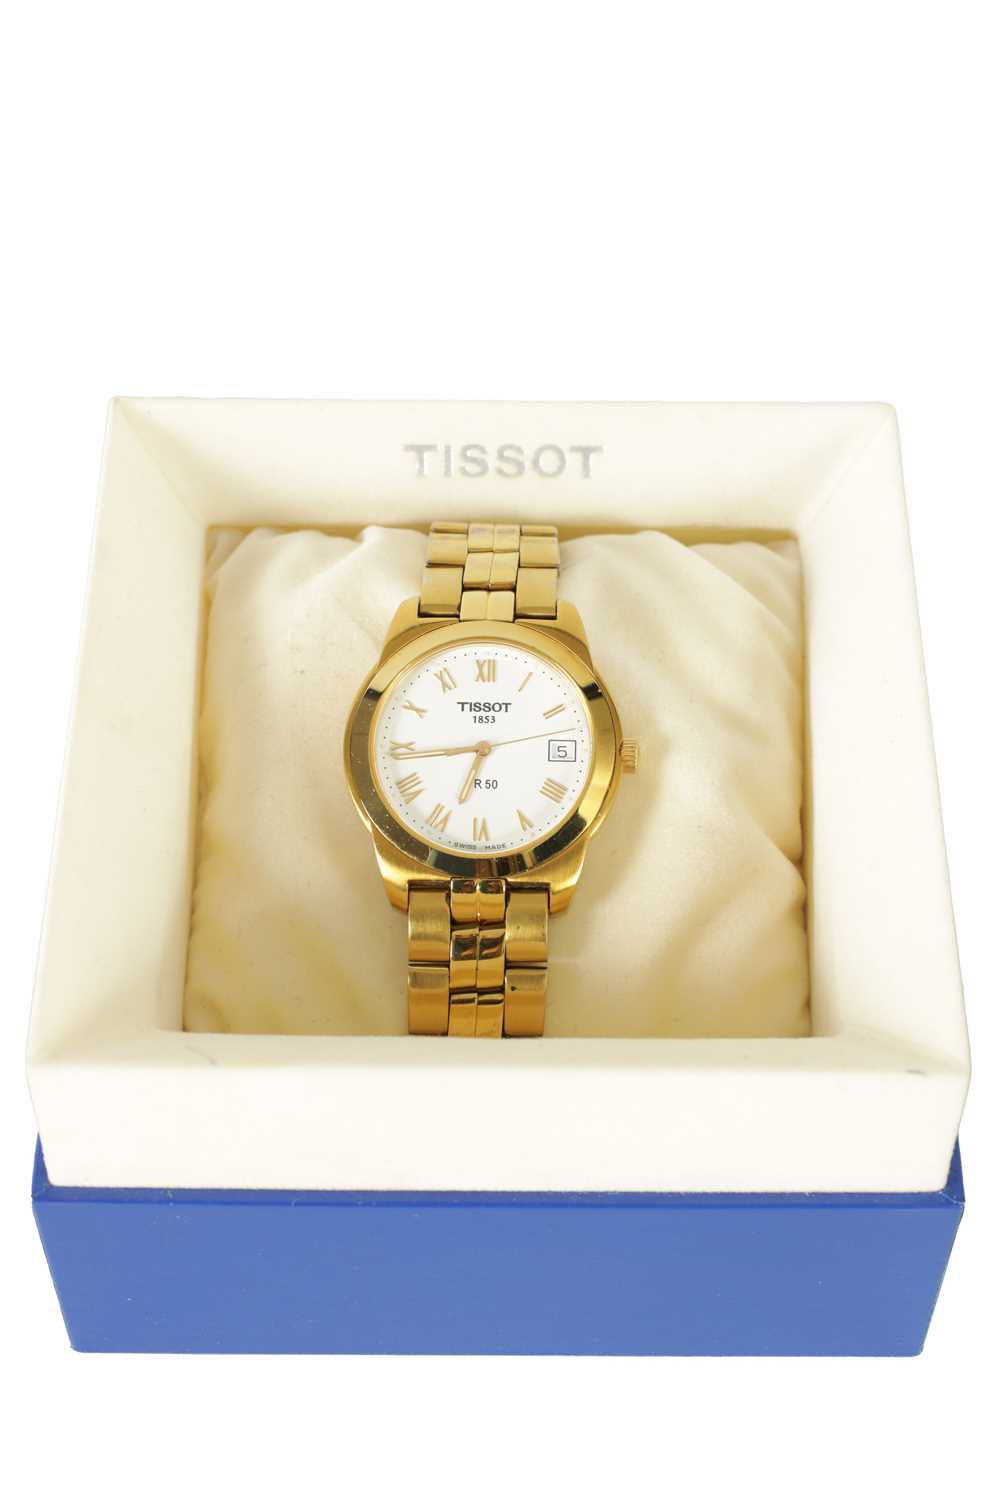 A GENTLEMAN’S GOLD PLATED TISSOT WRISTWATCH - Image 2 of 6